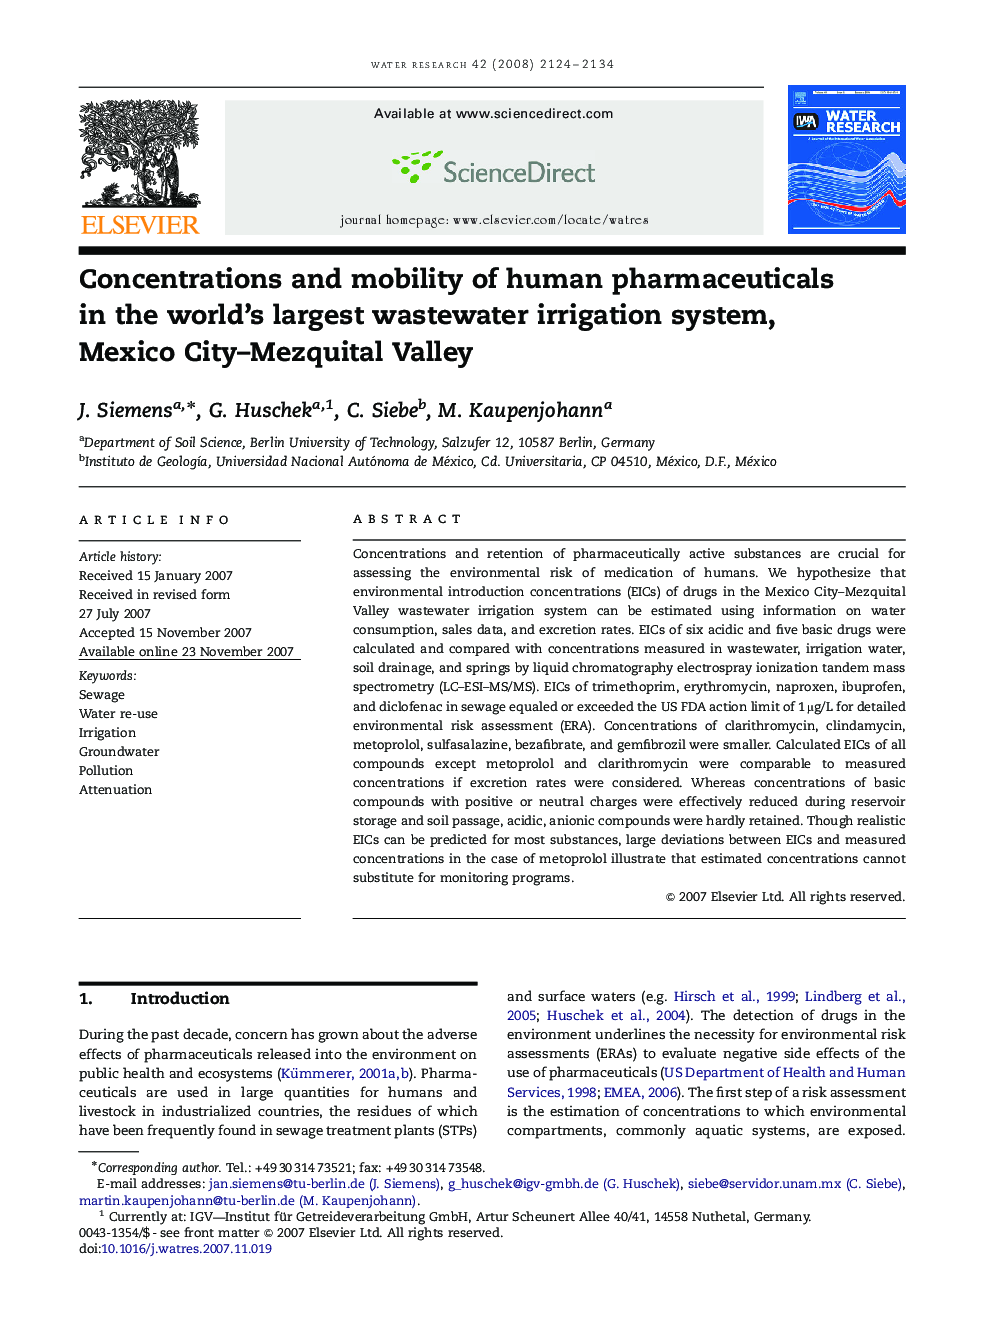 Concentrations and mobility of human pharmaceuticals in the world's largest wastewater irrigation system, Mexico City–Mezquital Valley